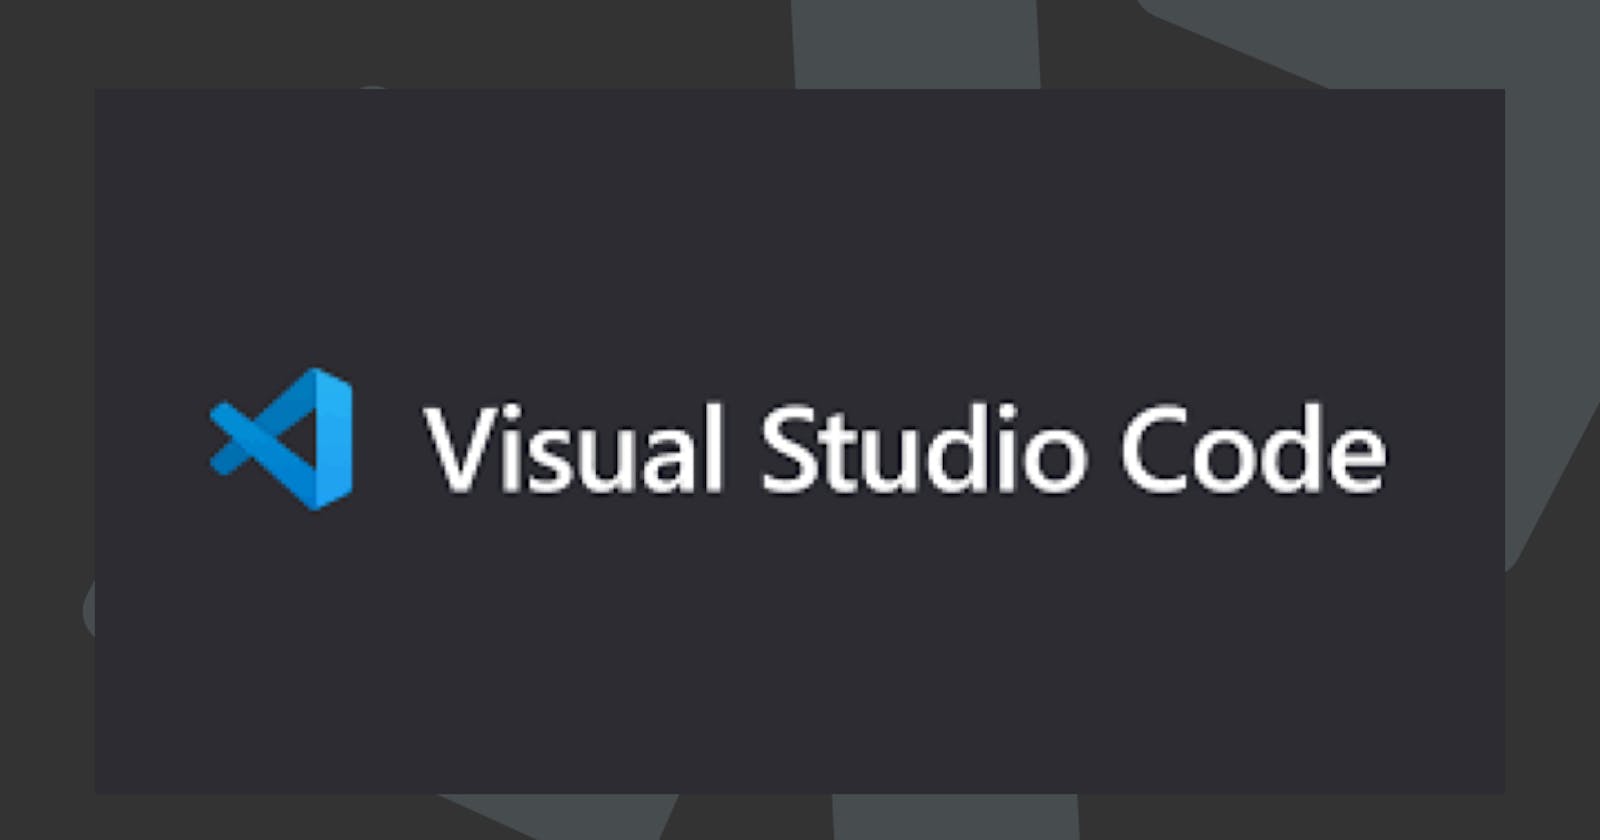 Top 10 Visual Studio Code extensions you need to install